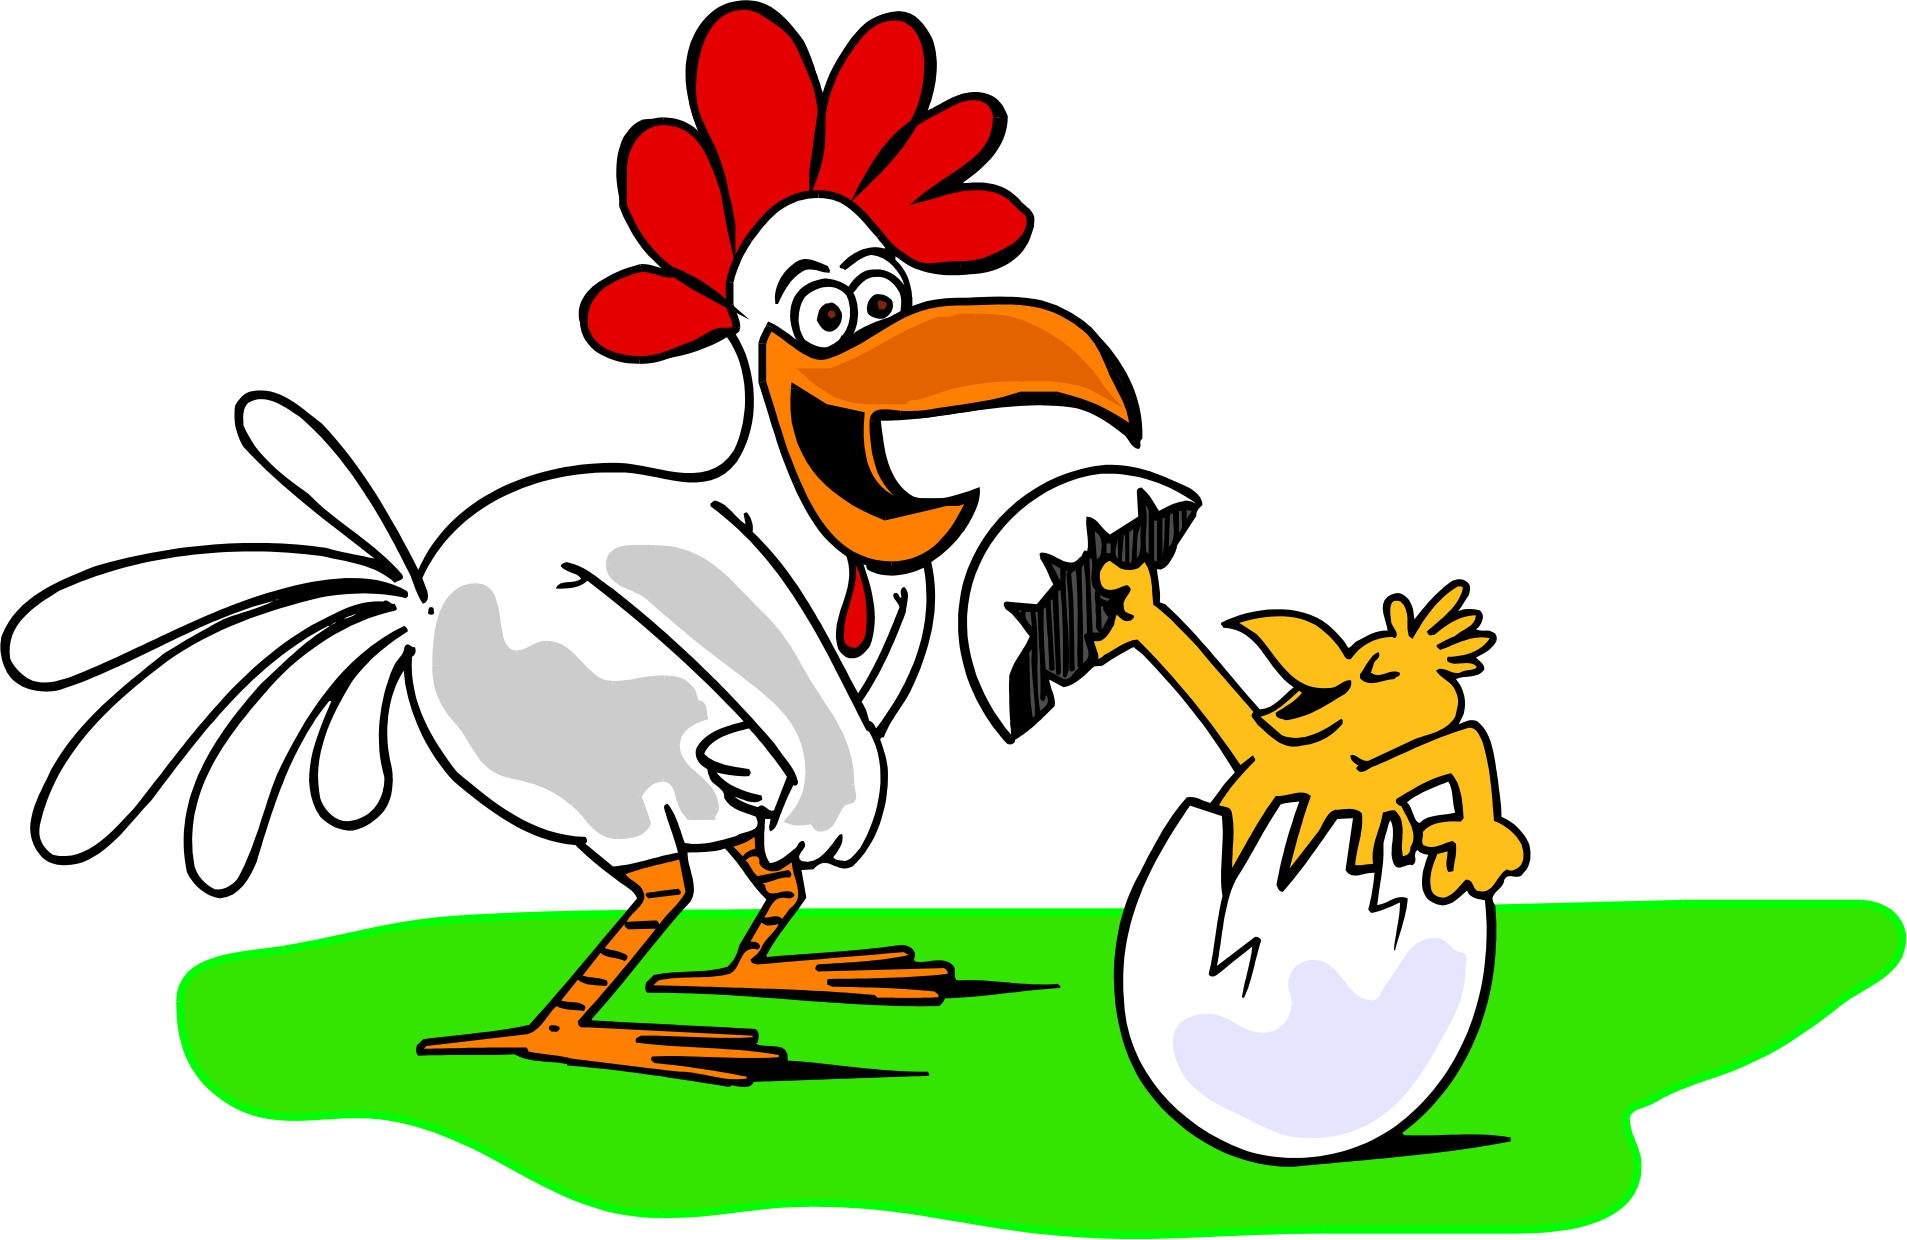 Cartoon chickens images.